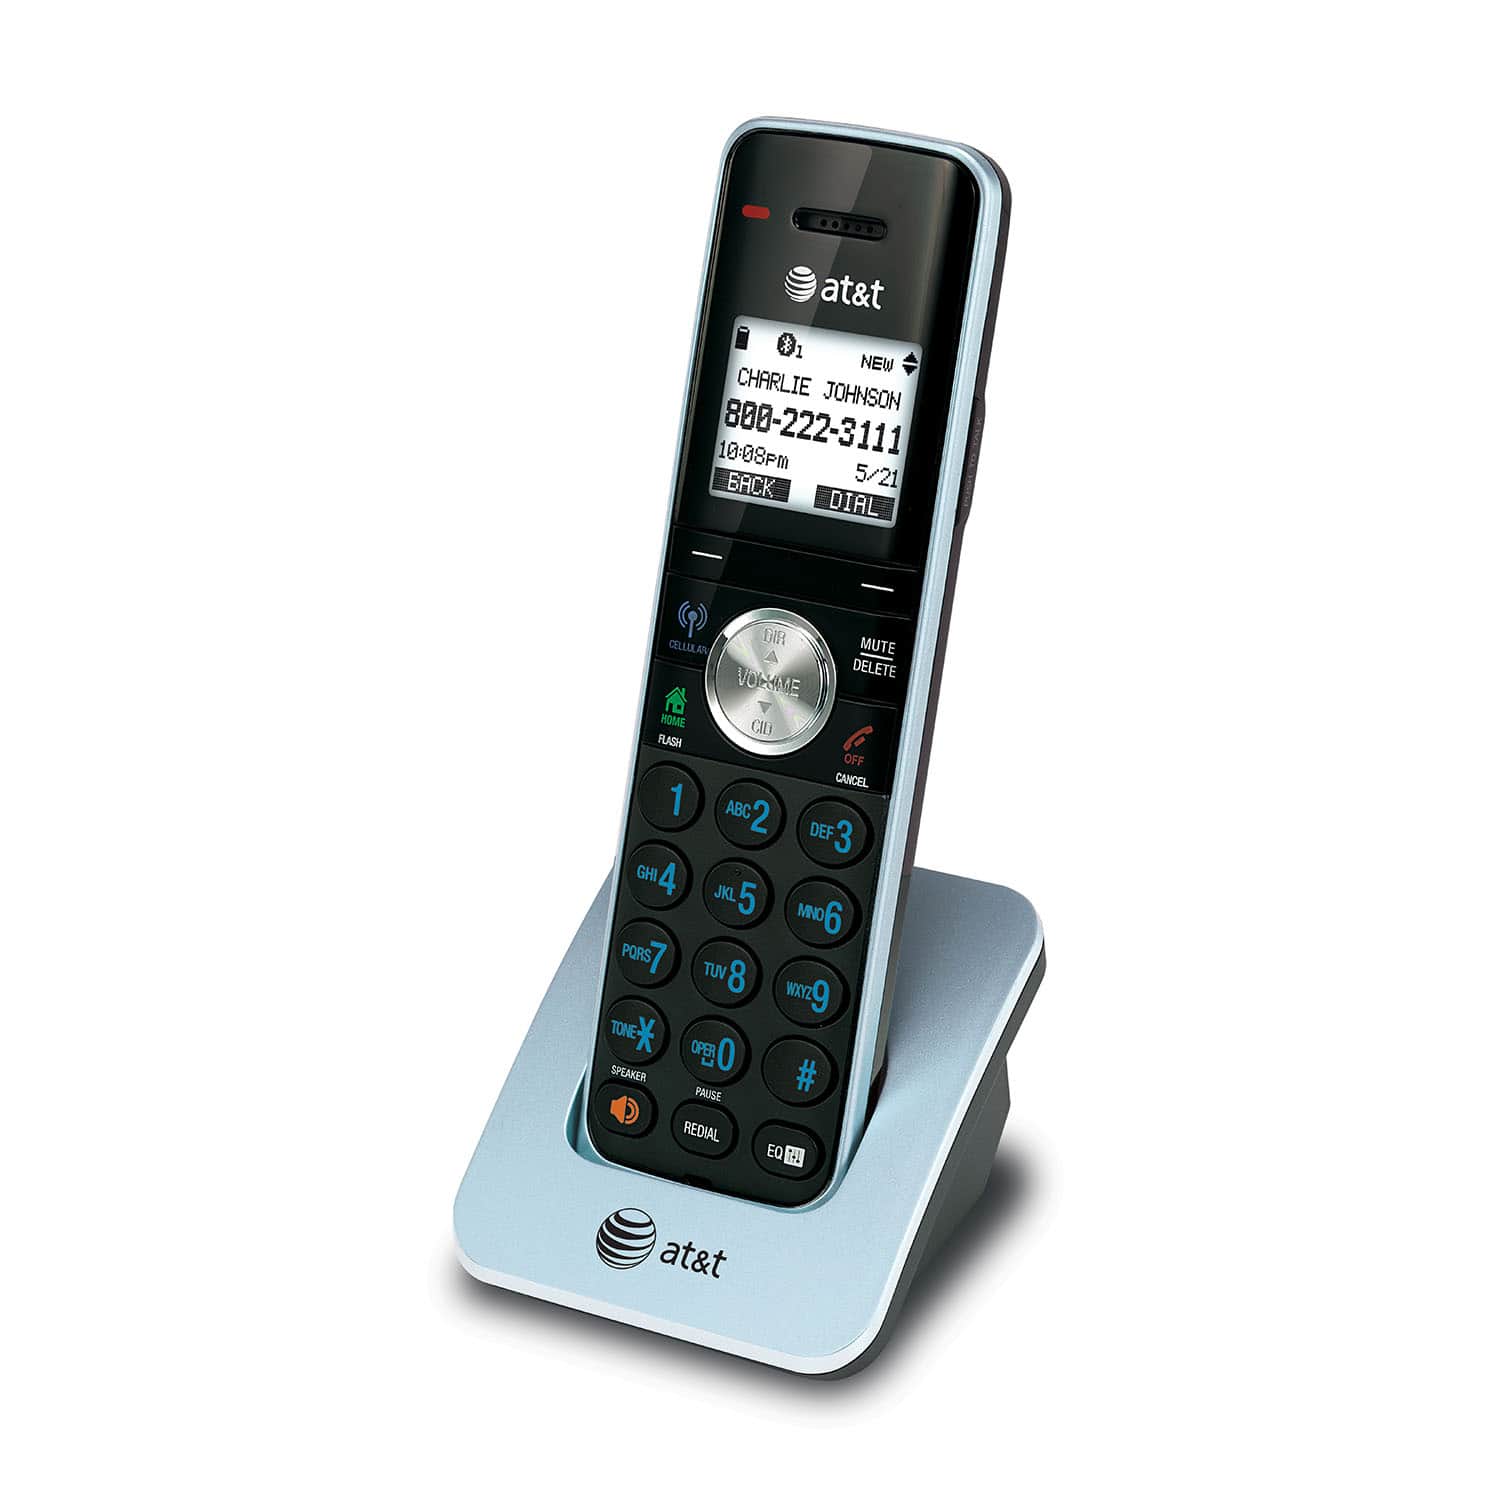 4 handset Connect to Cell™ answering system with caller ID/call waiting - view 6